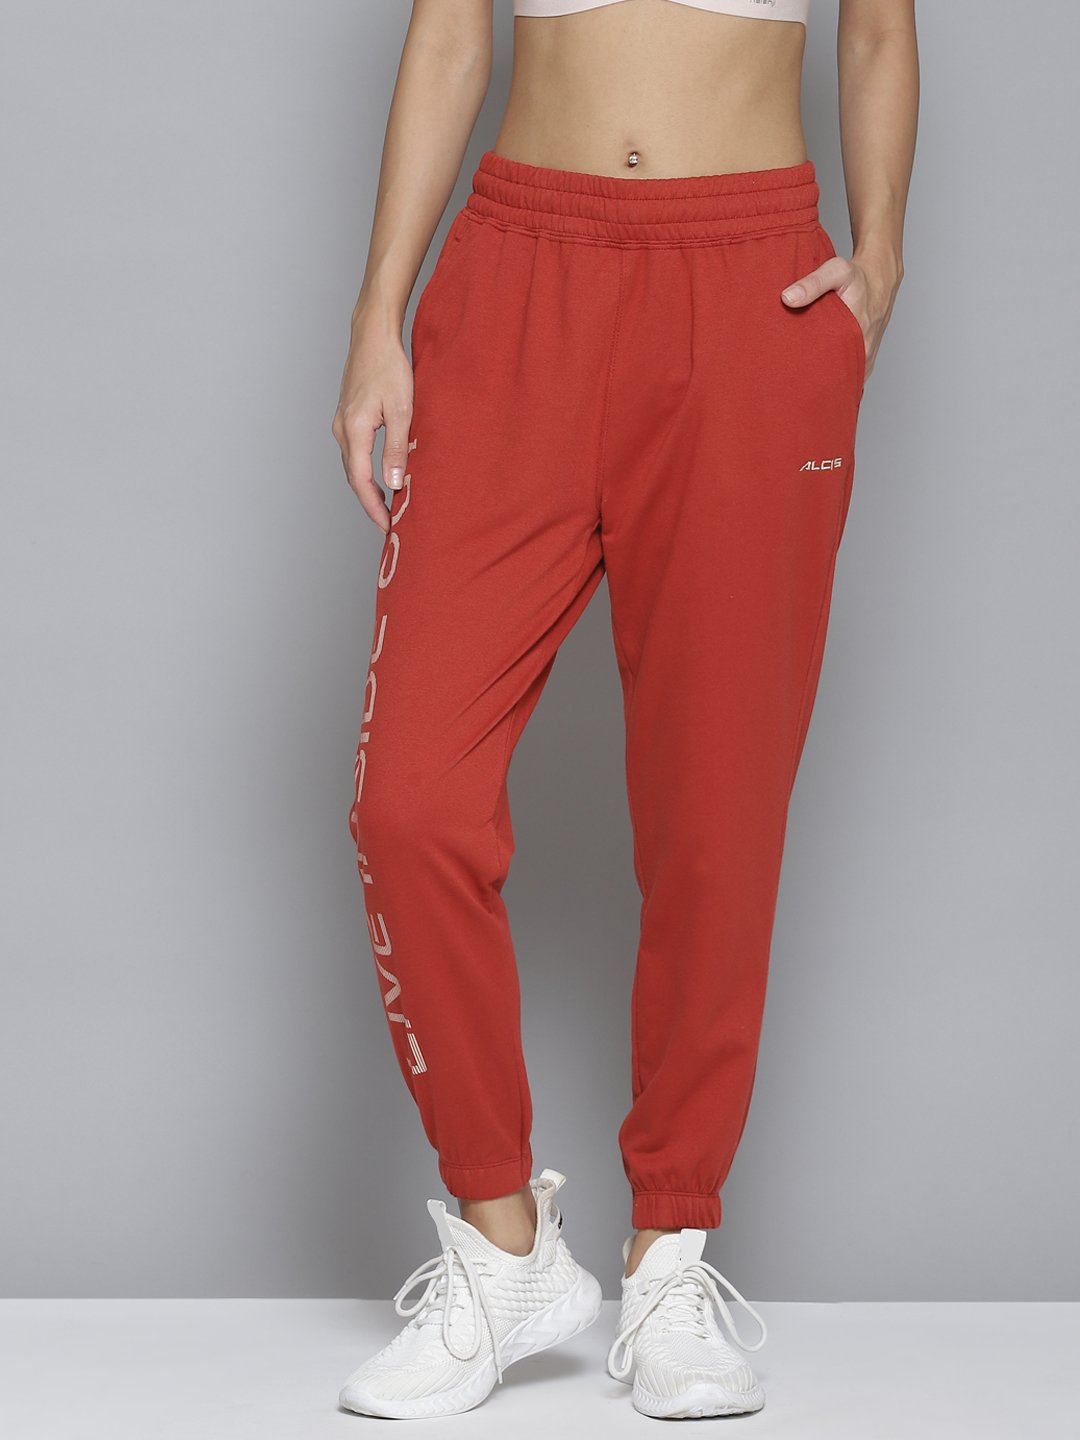 Alcis Women Red Printed Slim-Fit Joggers